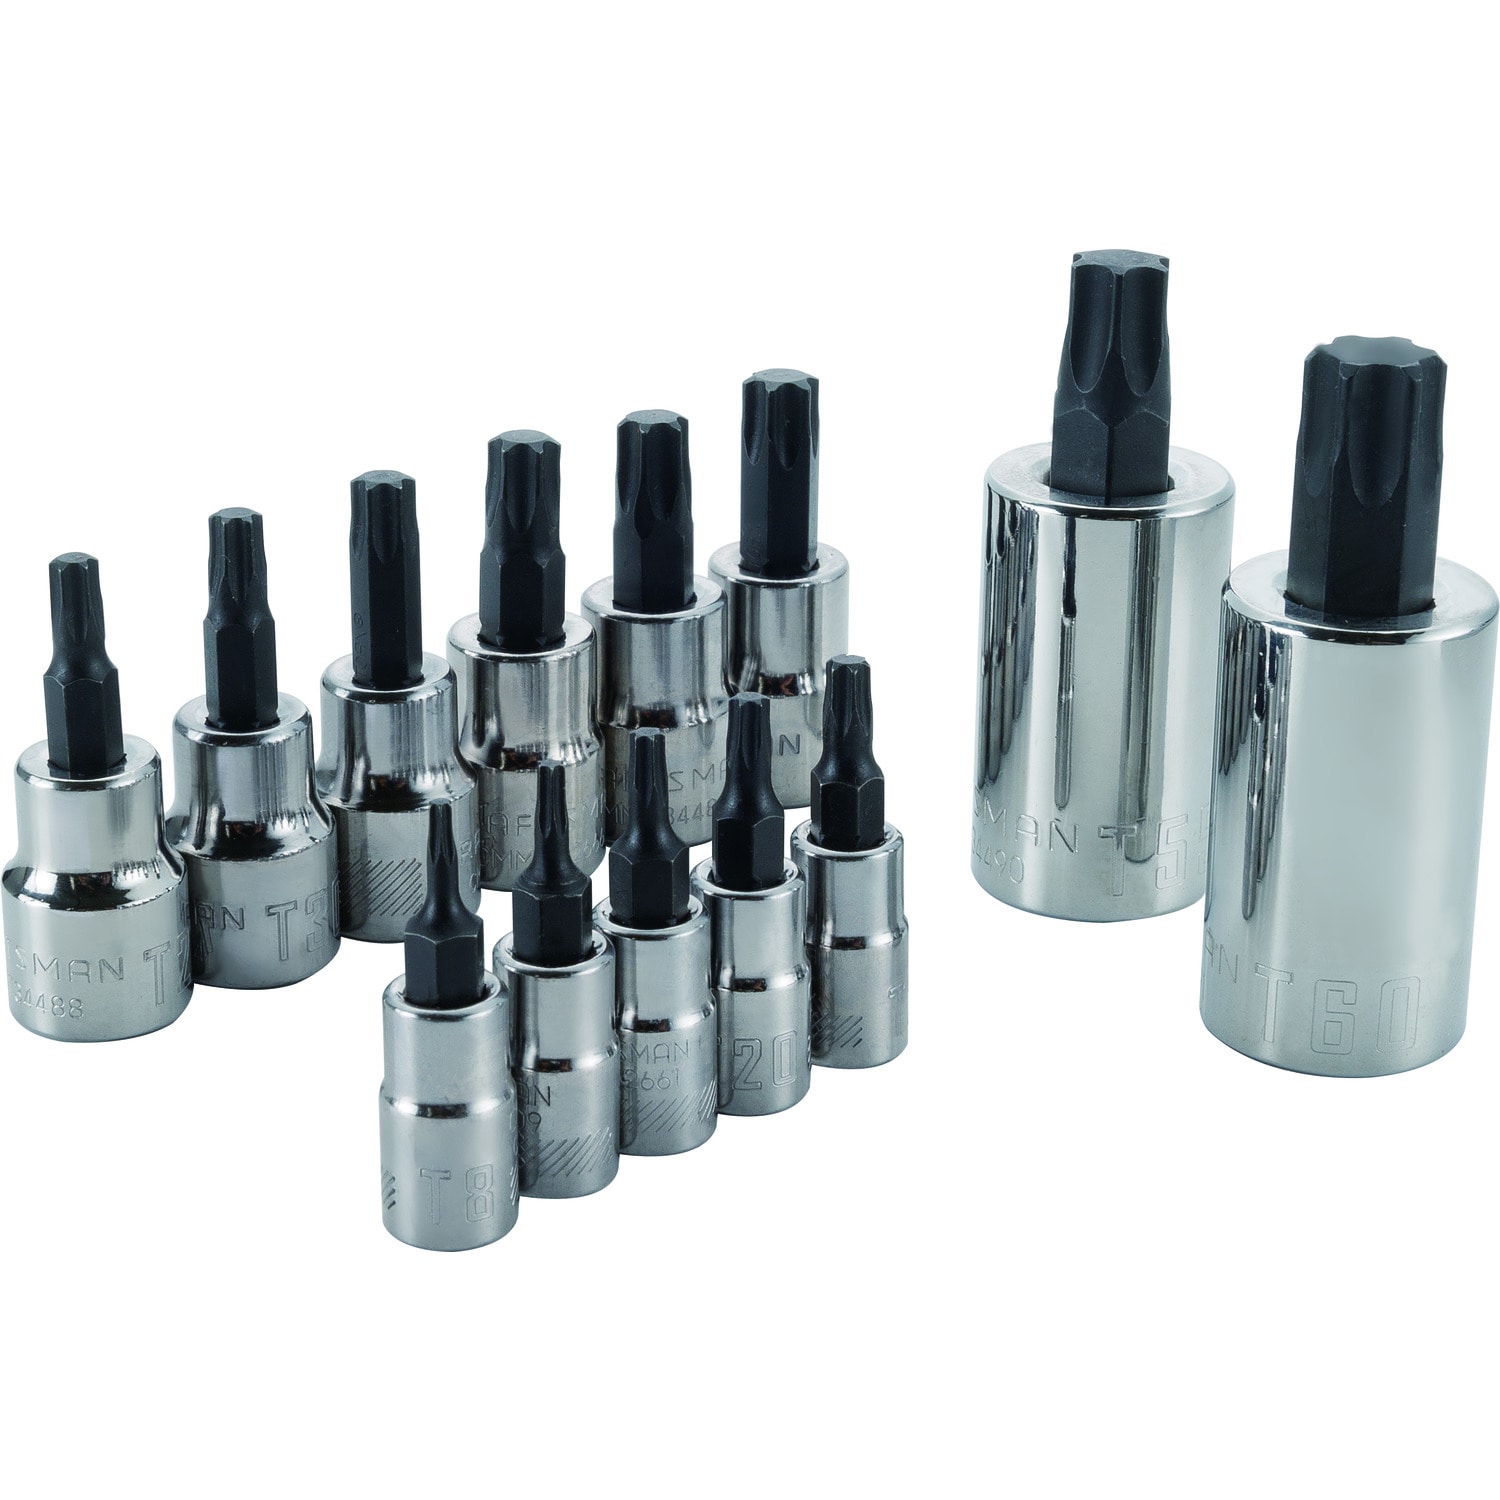 are husky torx sockets made in usa